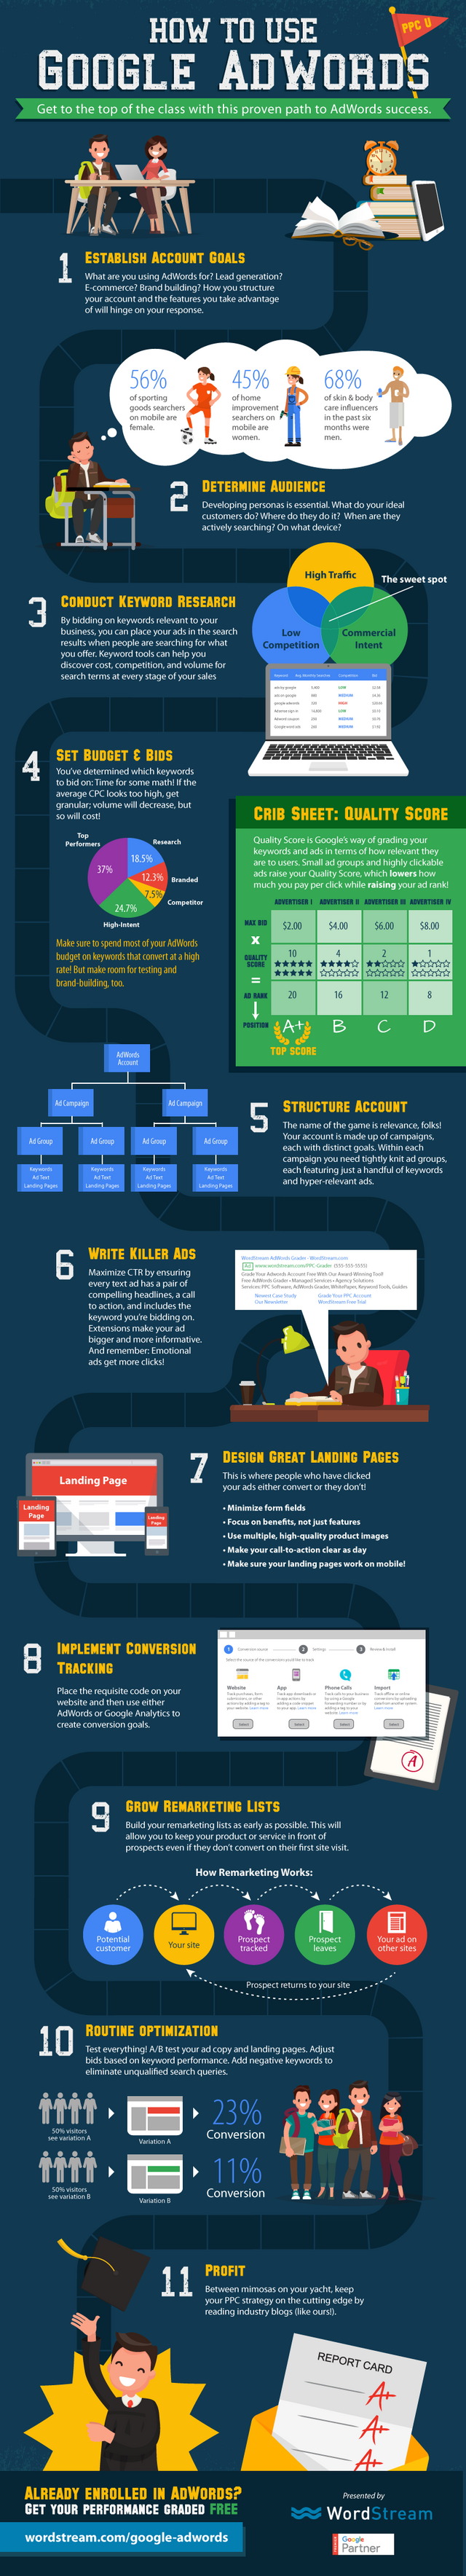 how-to-use-google-adwords-infographic.png